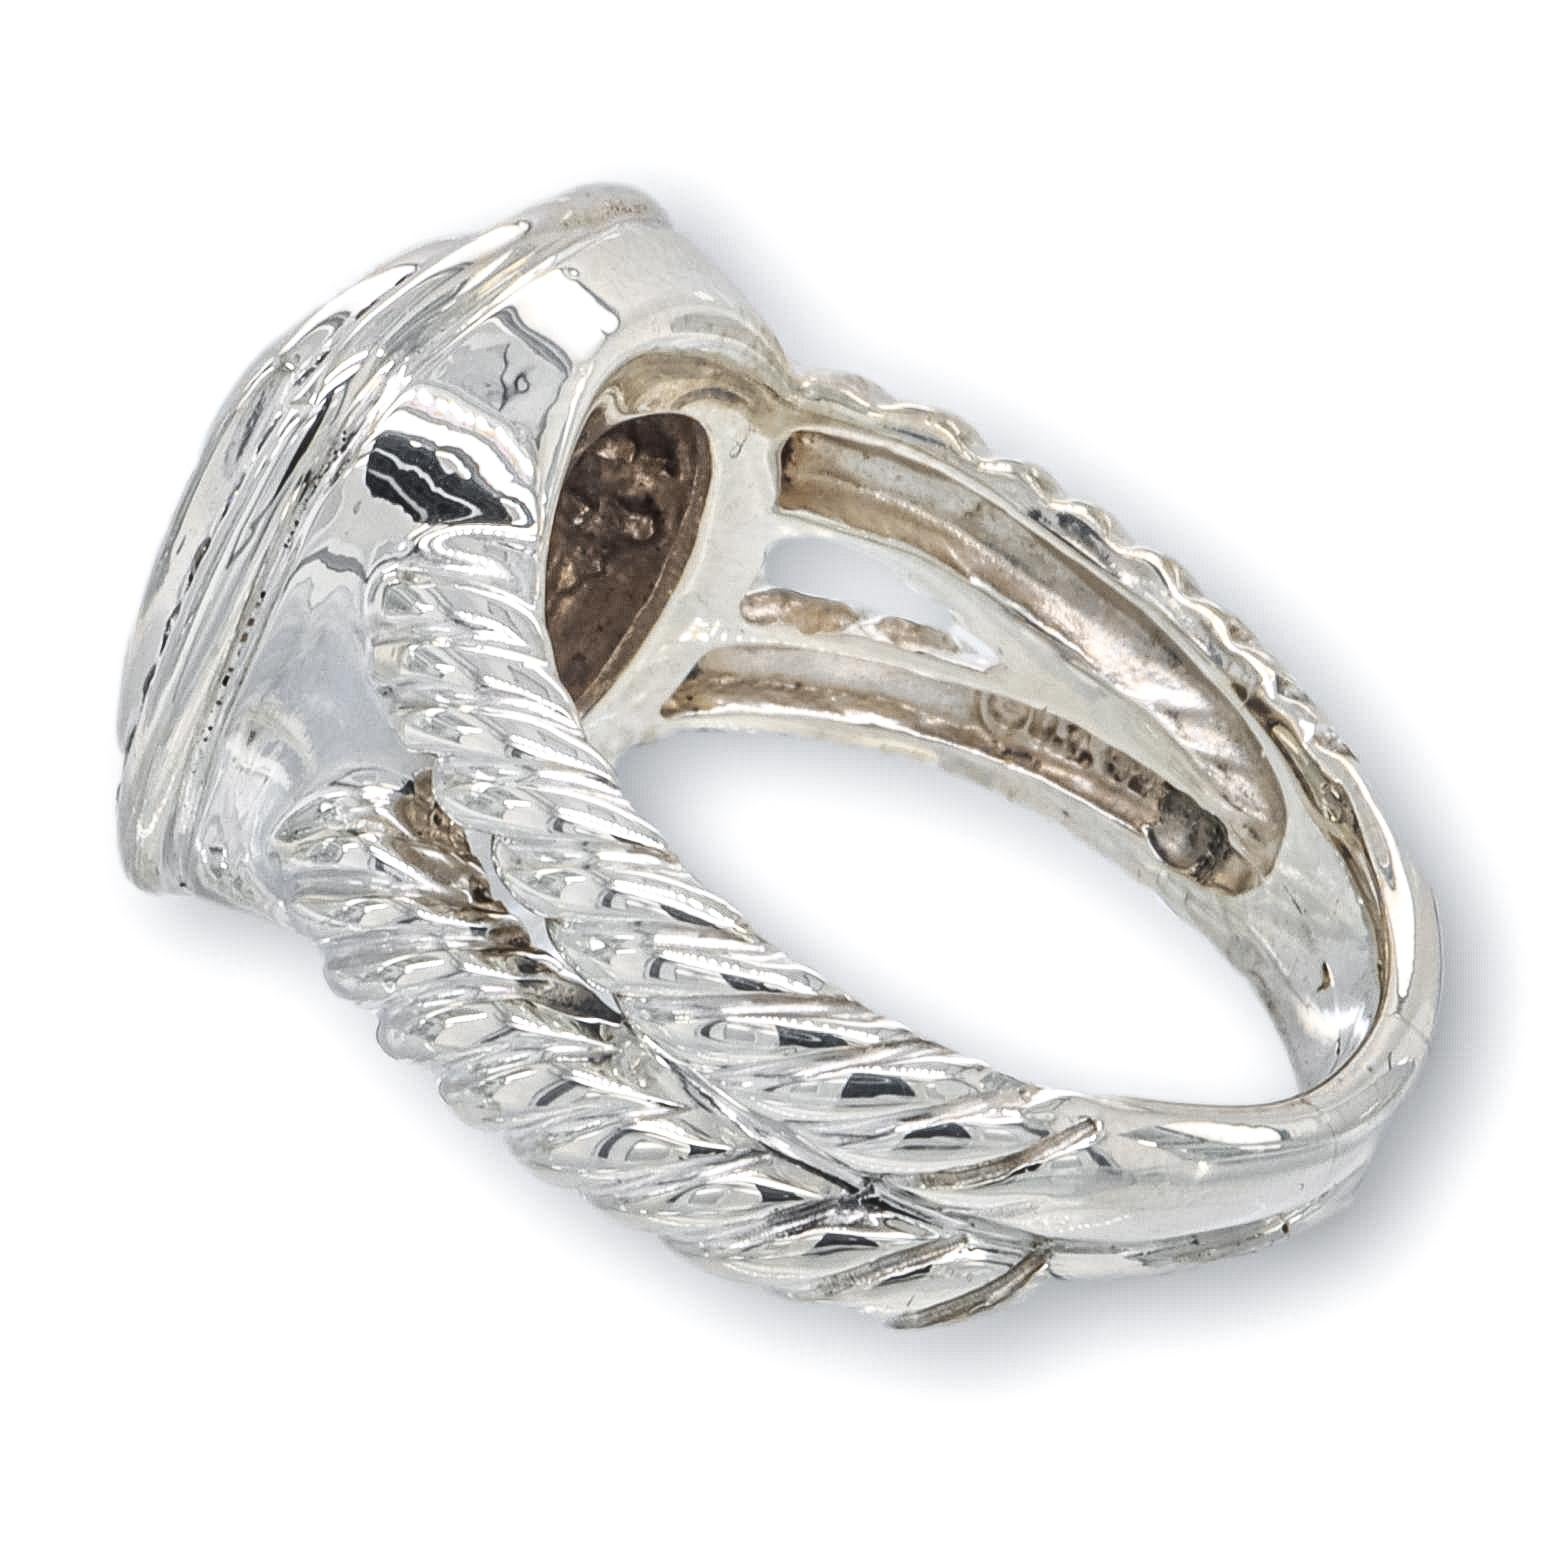 David Yurman ring from the Albion collection finely crafted in sterling silver featuring a faceted cushion smokey quartz gemstone center adorned with a diamond bead set halo with 22 round brilliant cut diamonds weighing 0.22 cts. and cable split